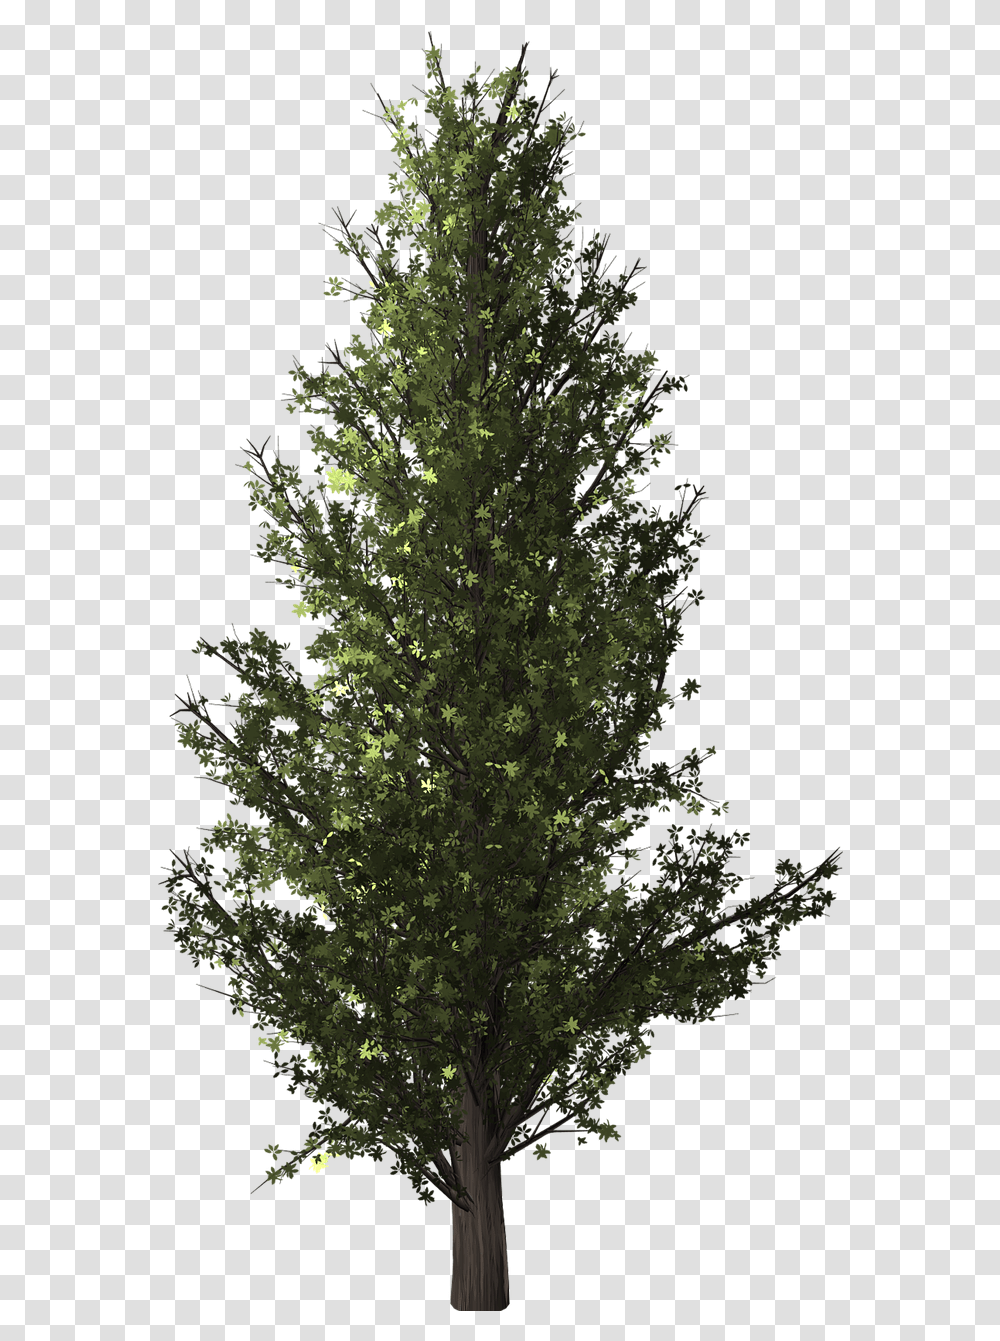 Tree Clip Art Forest Plants Image Forest Tree Background, Fir, Conifer, Outdoors, Pine Transparent Png